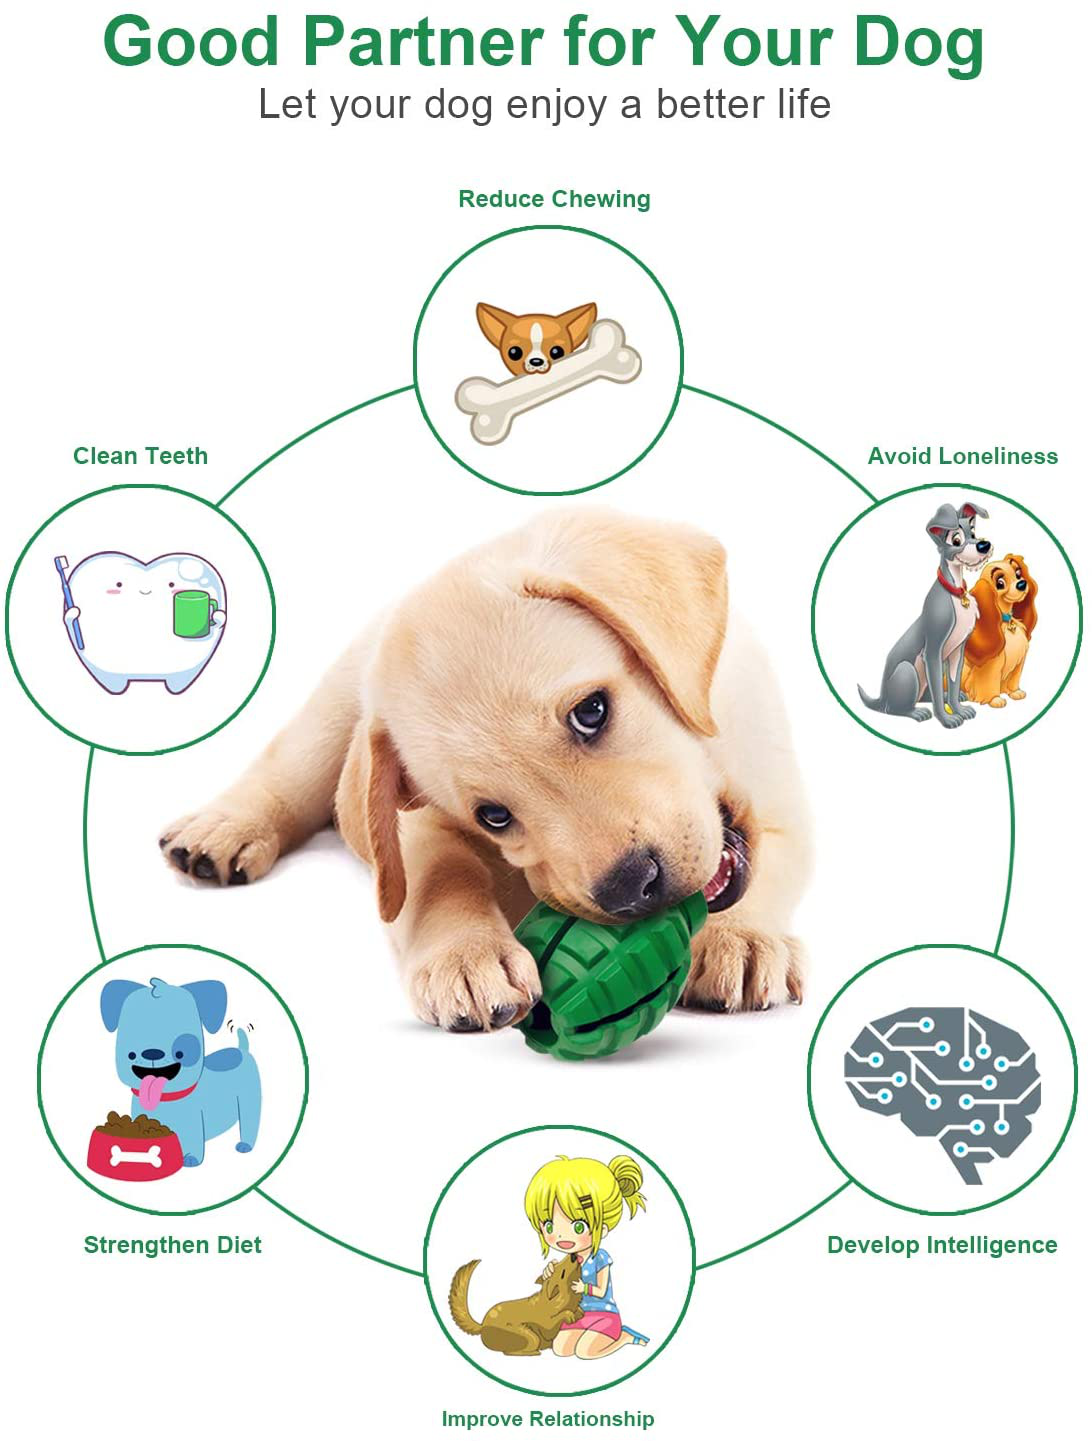 Dog Toys for Aggressive Chewers Large Breed Interactive Dog Toys